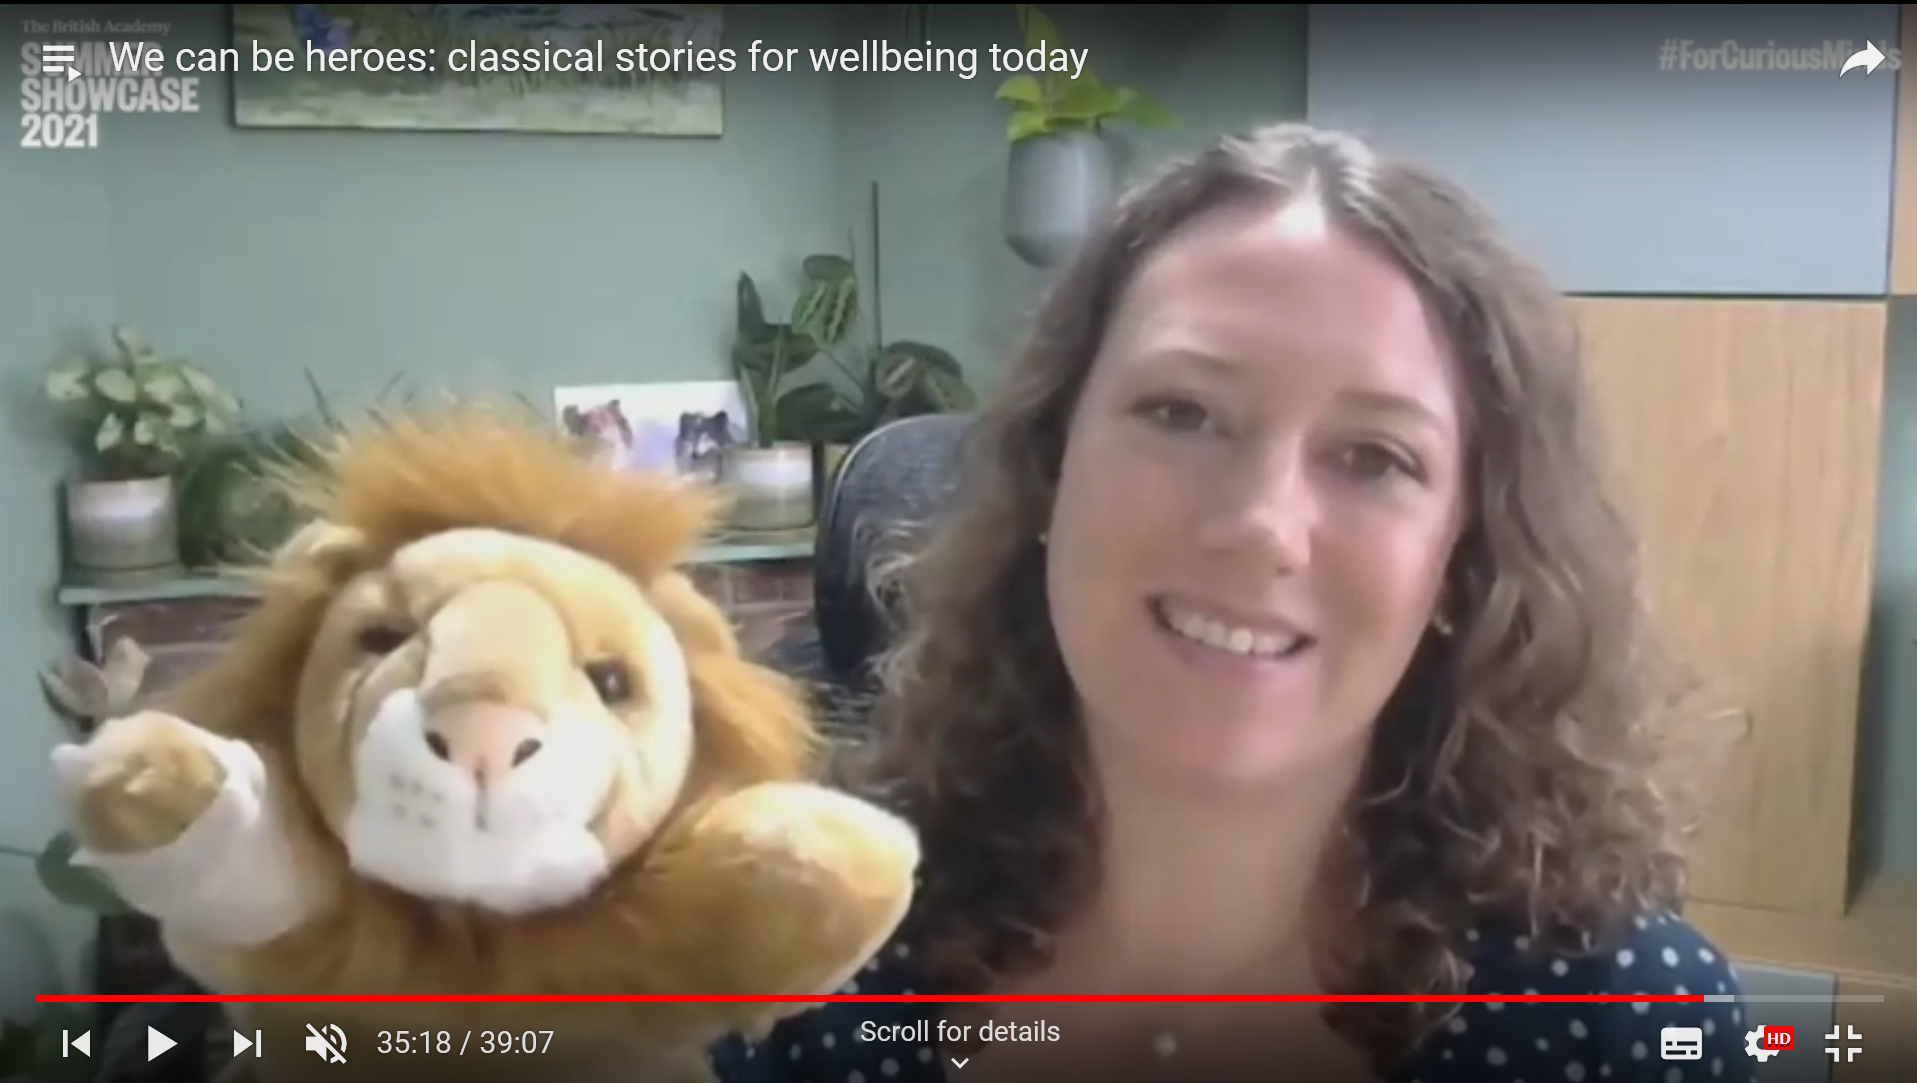 screenshot from British Academy Showcase 2021 showing Rachel Bryant Davies presenting with a lion hand puppet